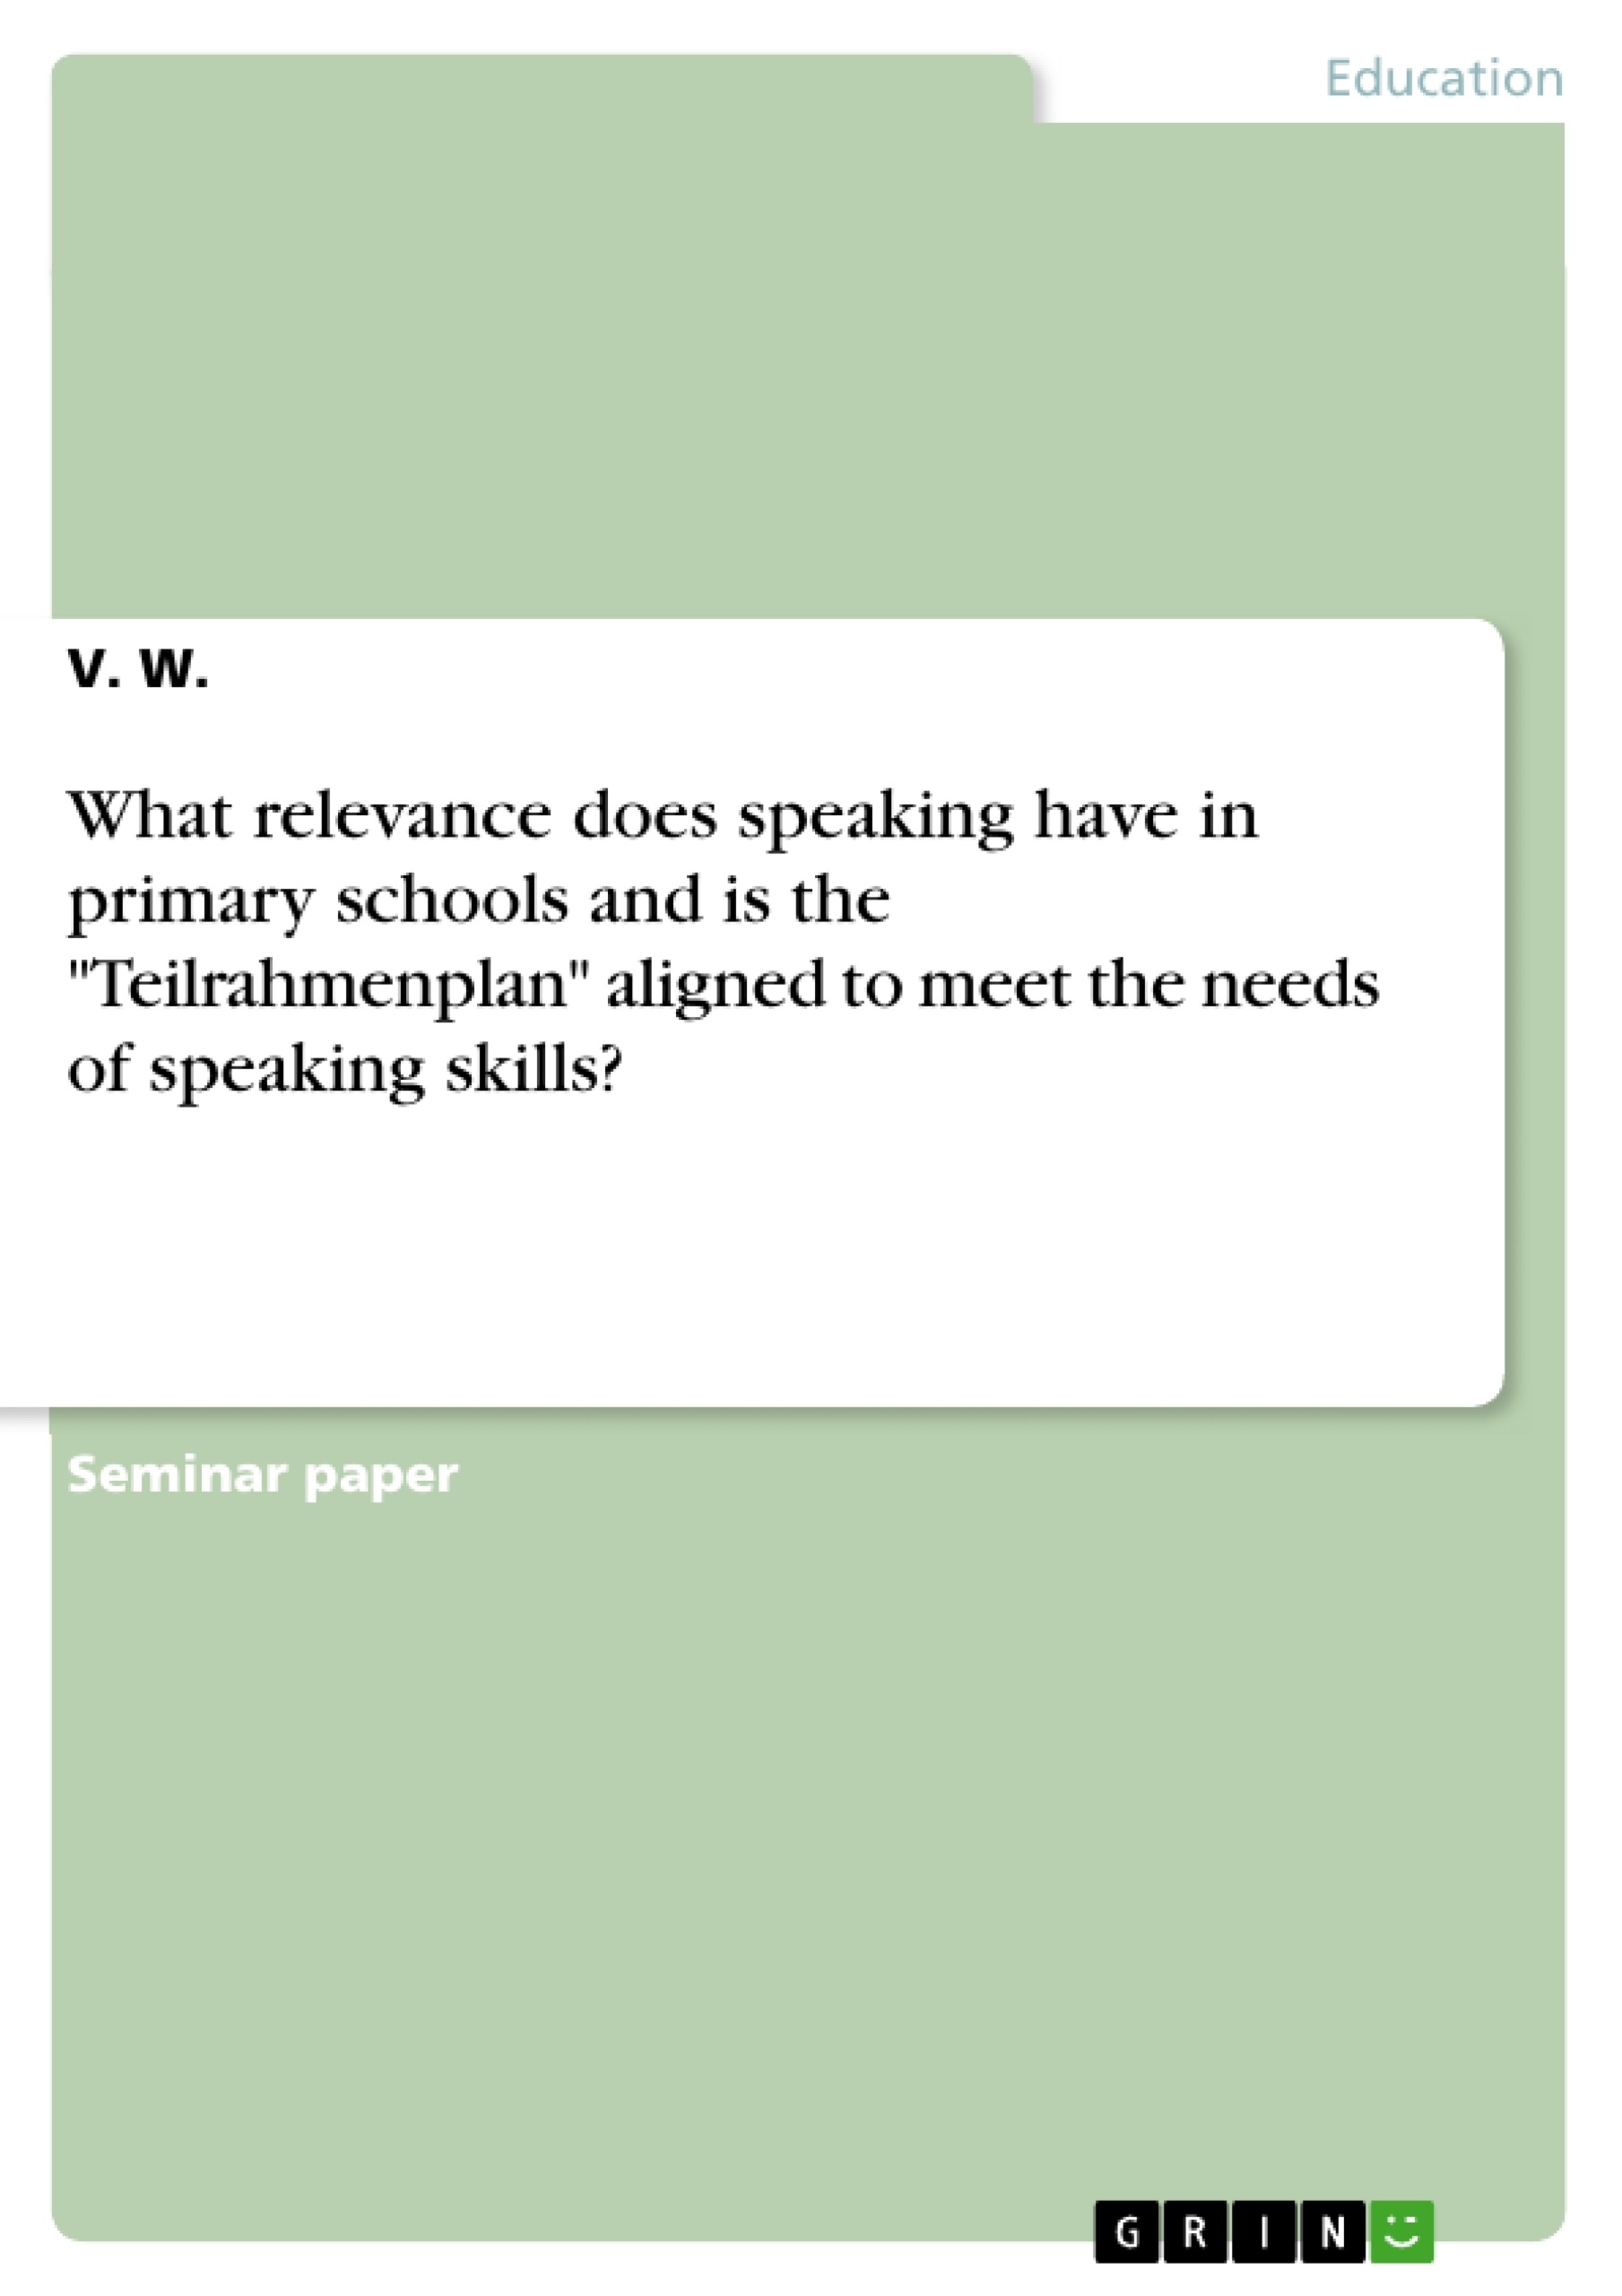 Title: What relevance does speaking have in primary schools and is the "Teilrahmenplan" aligned to meet the needs of speaking skills?